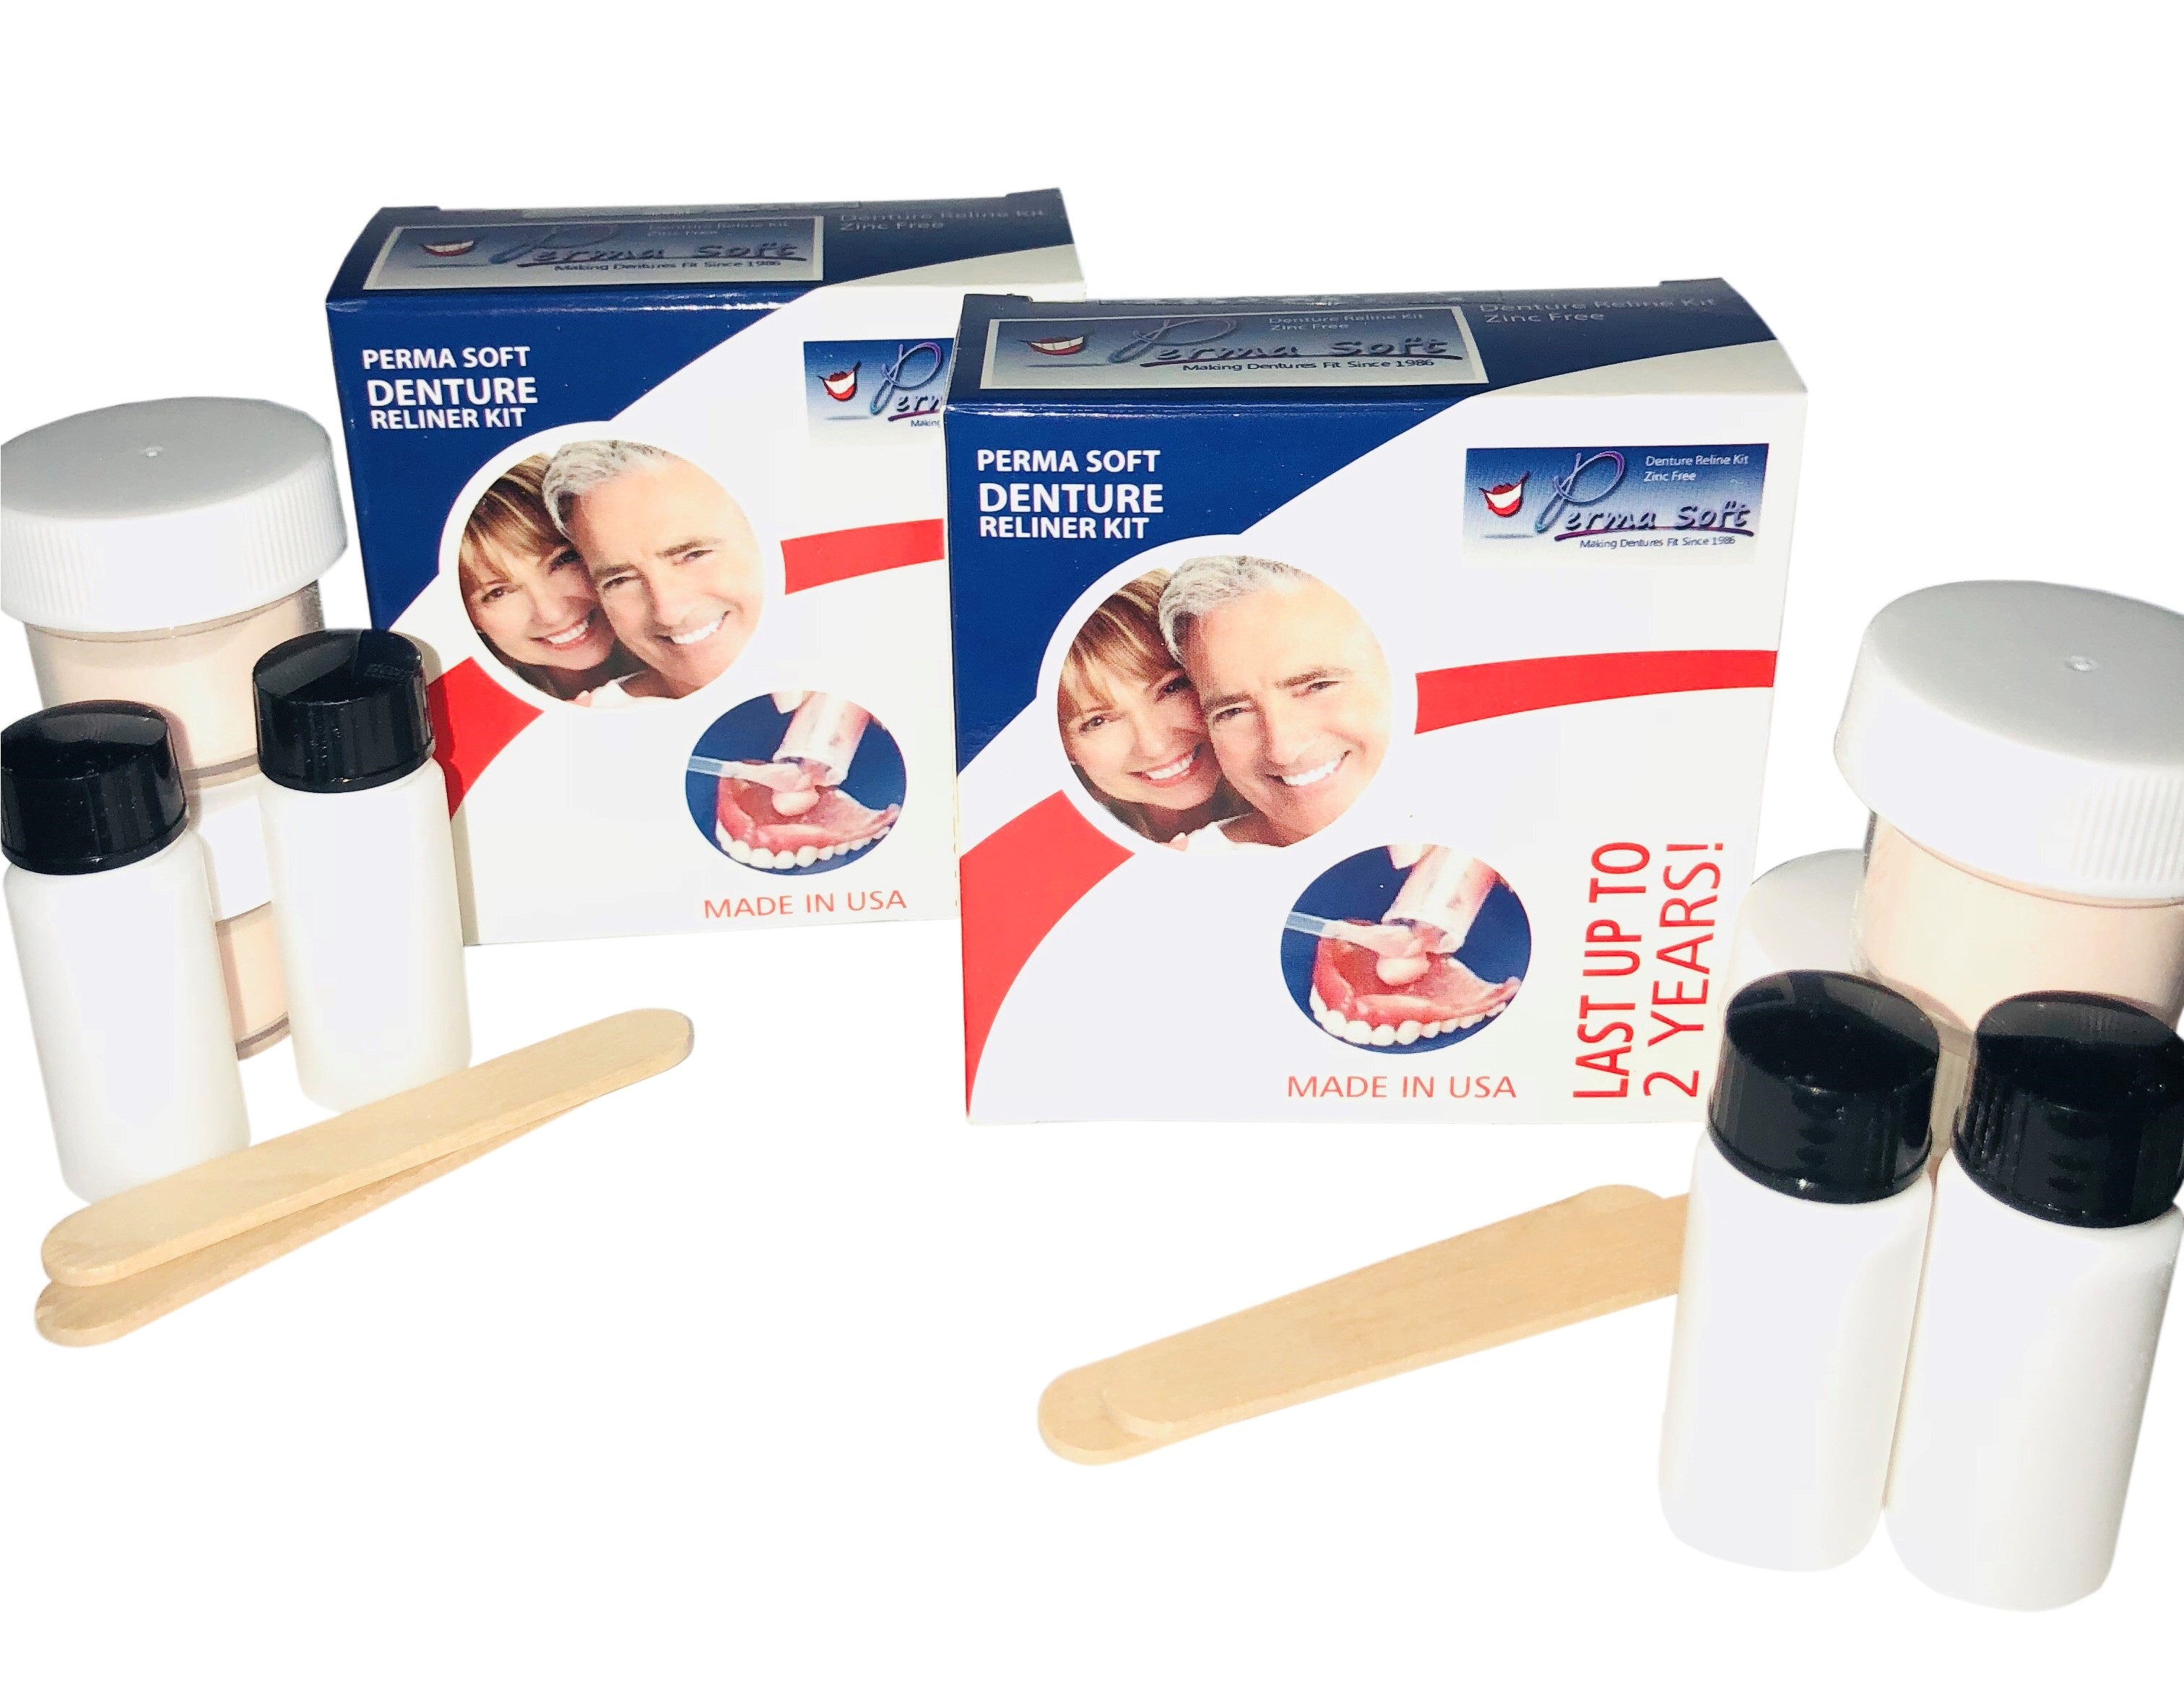 Our Featured Product: PERMA SOFT DENTURE RELINE KIT – Perma Laboratories